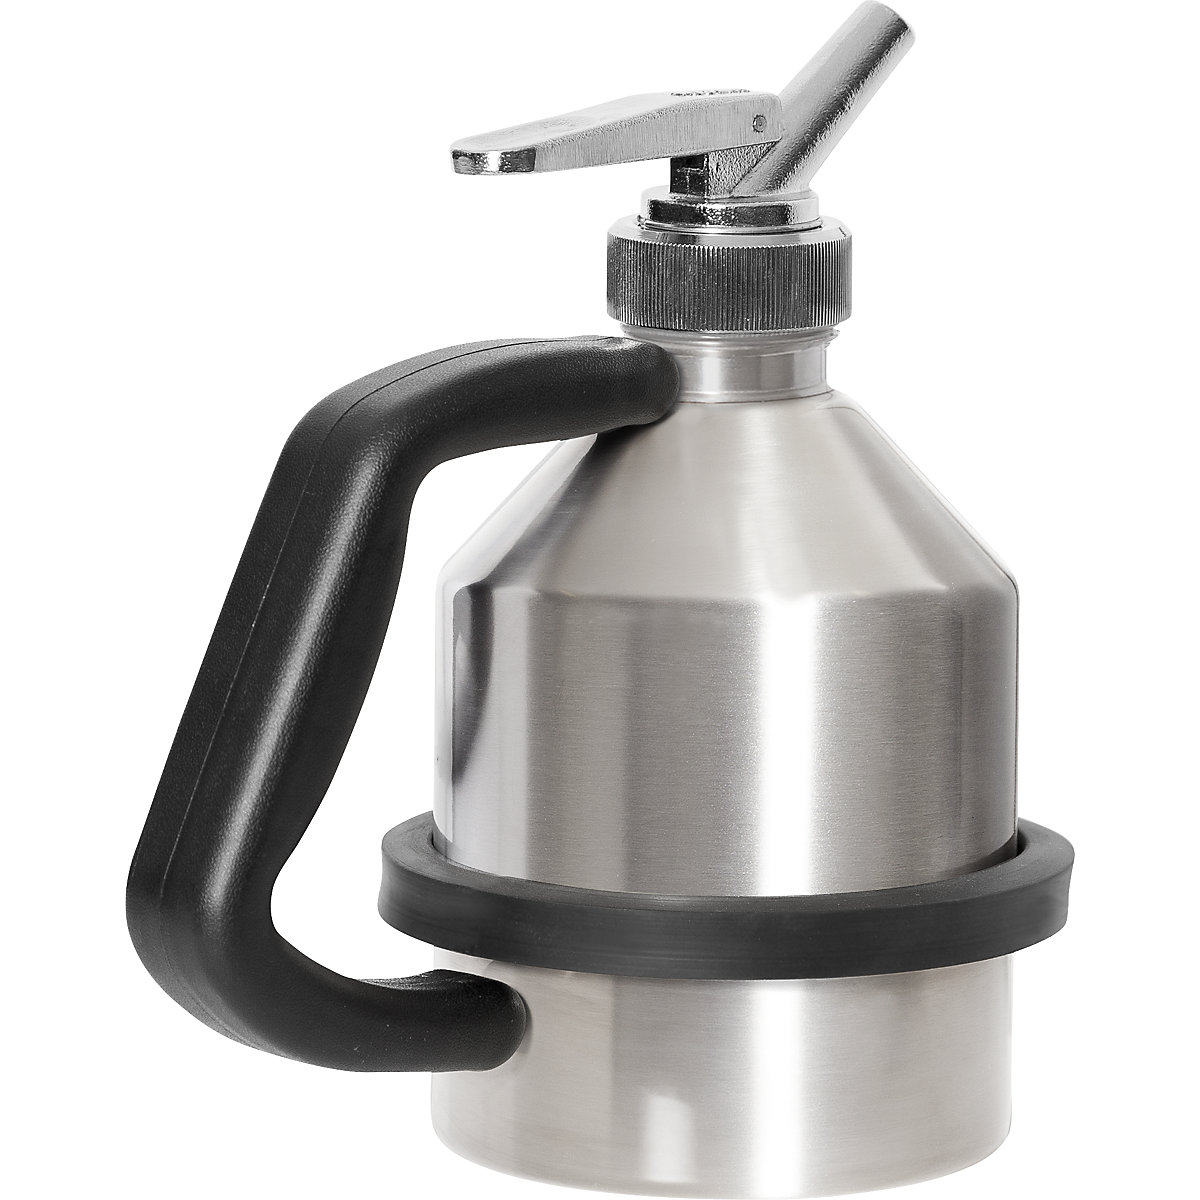 Stainless steel safety dispensing container - FALCON